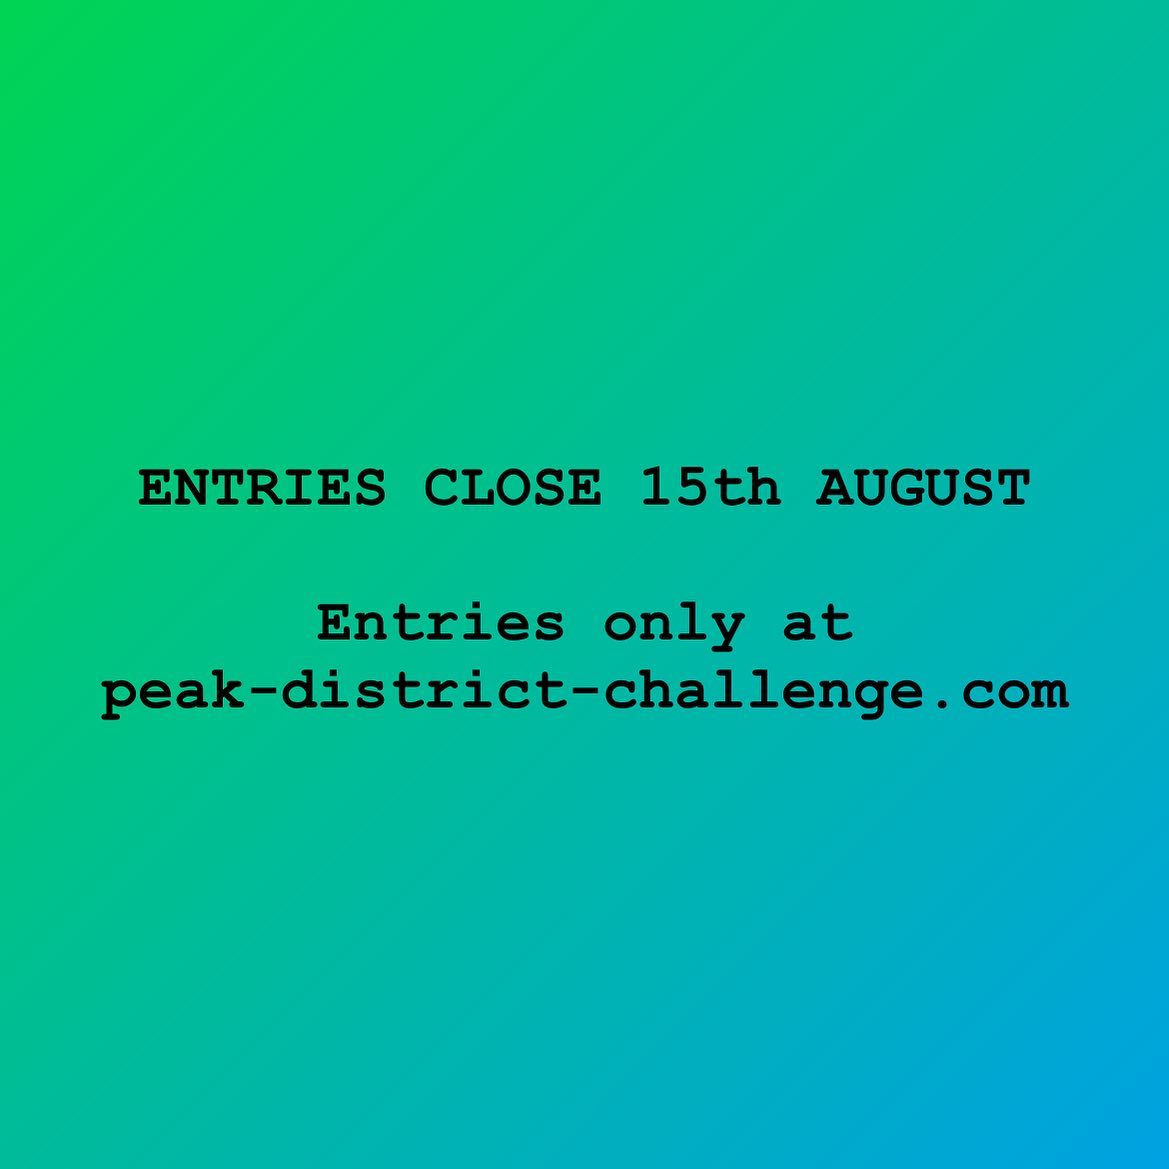 Peak District Challenge entries close on 15 August. Sign up now to take part in distances from 10...